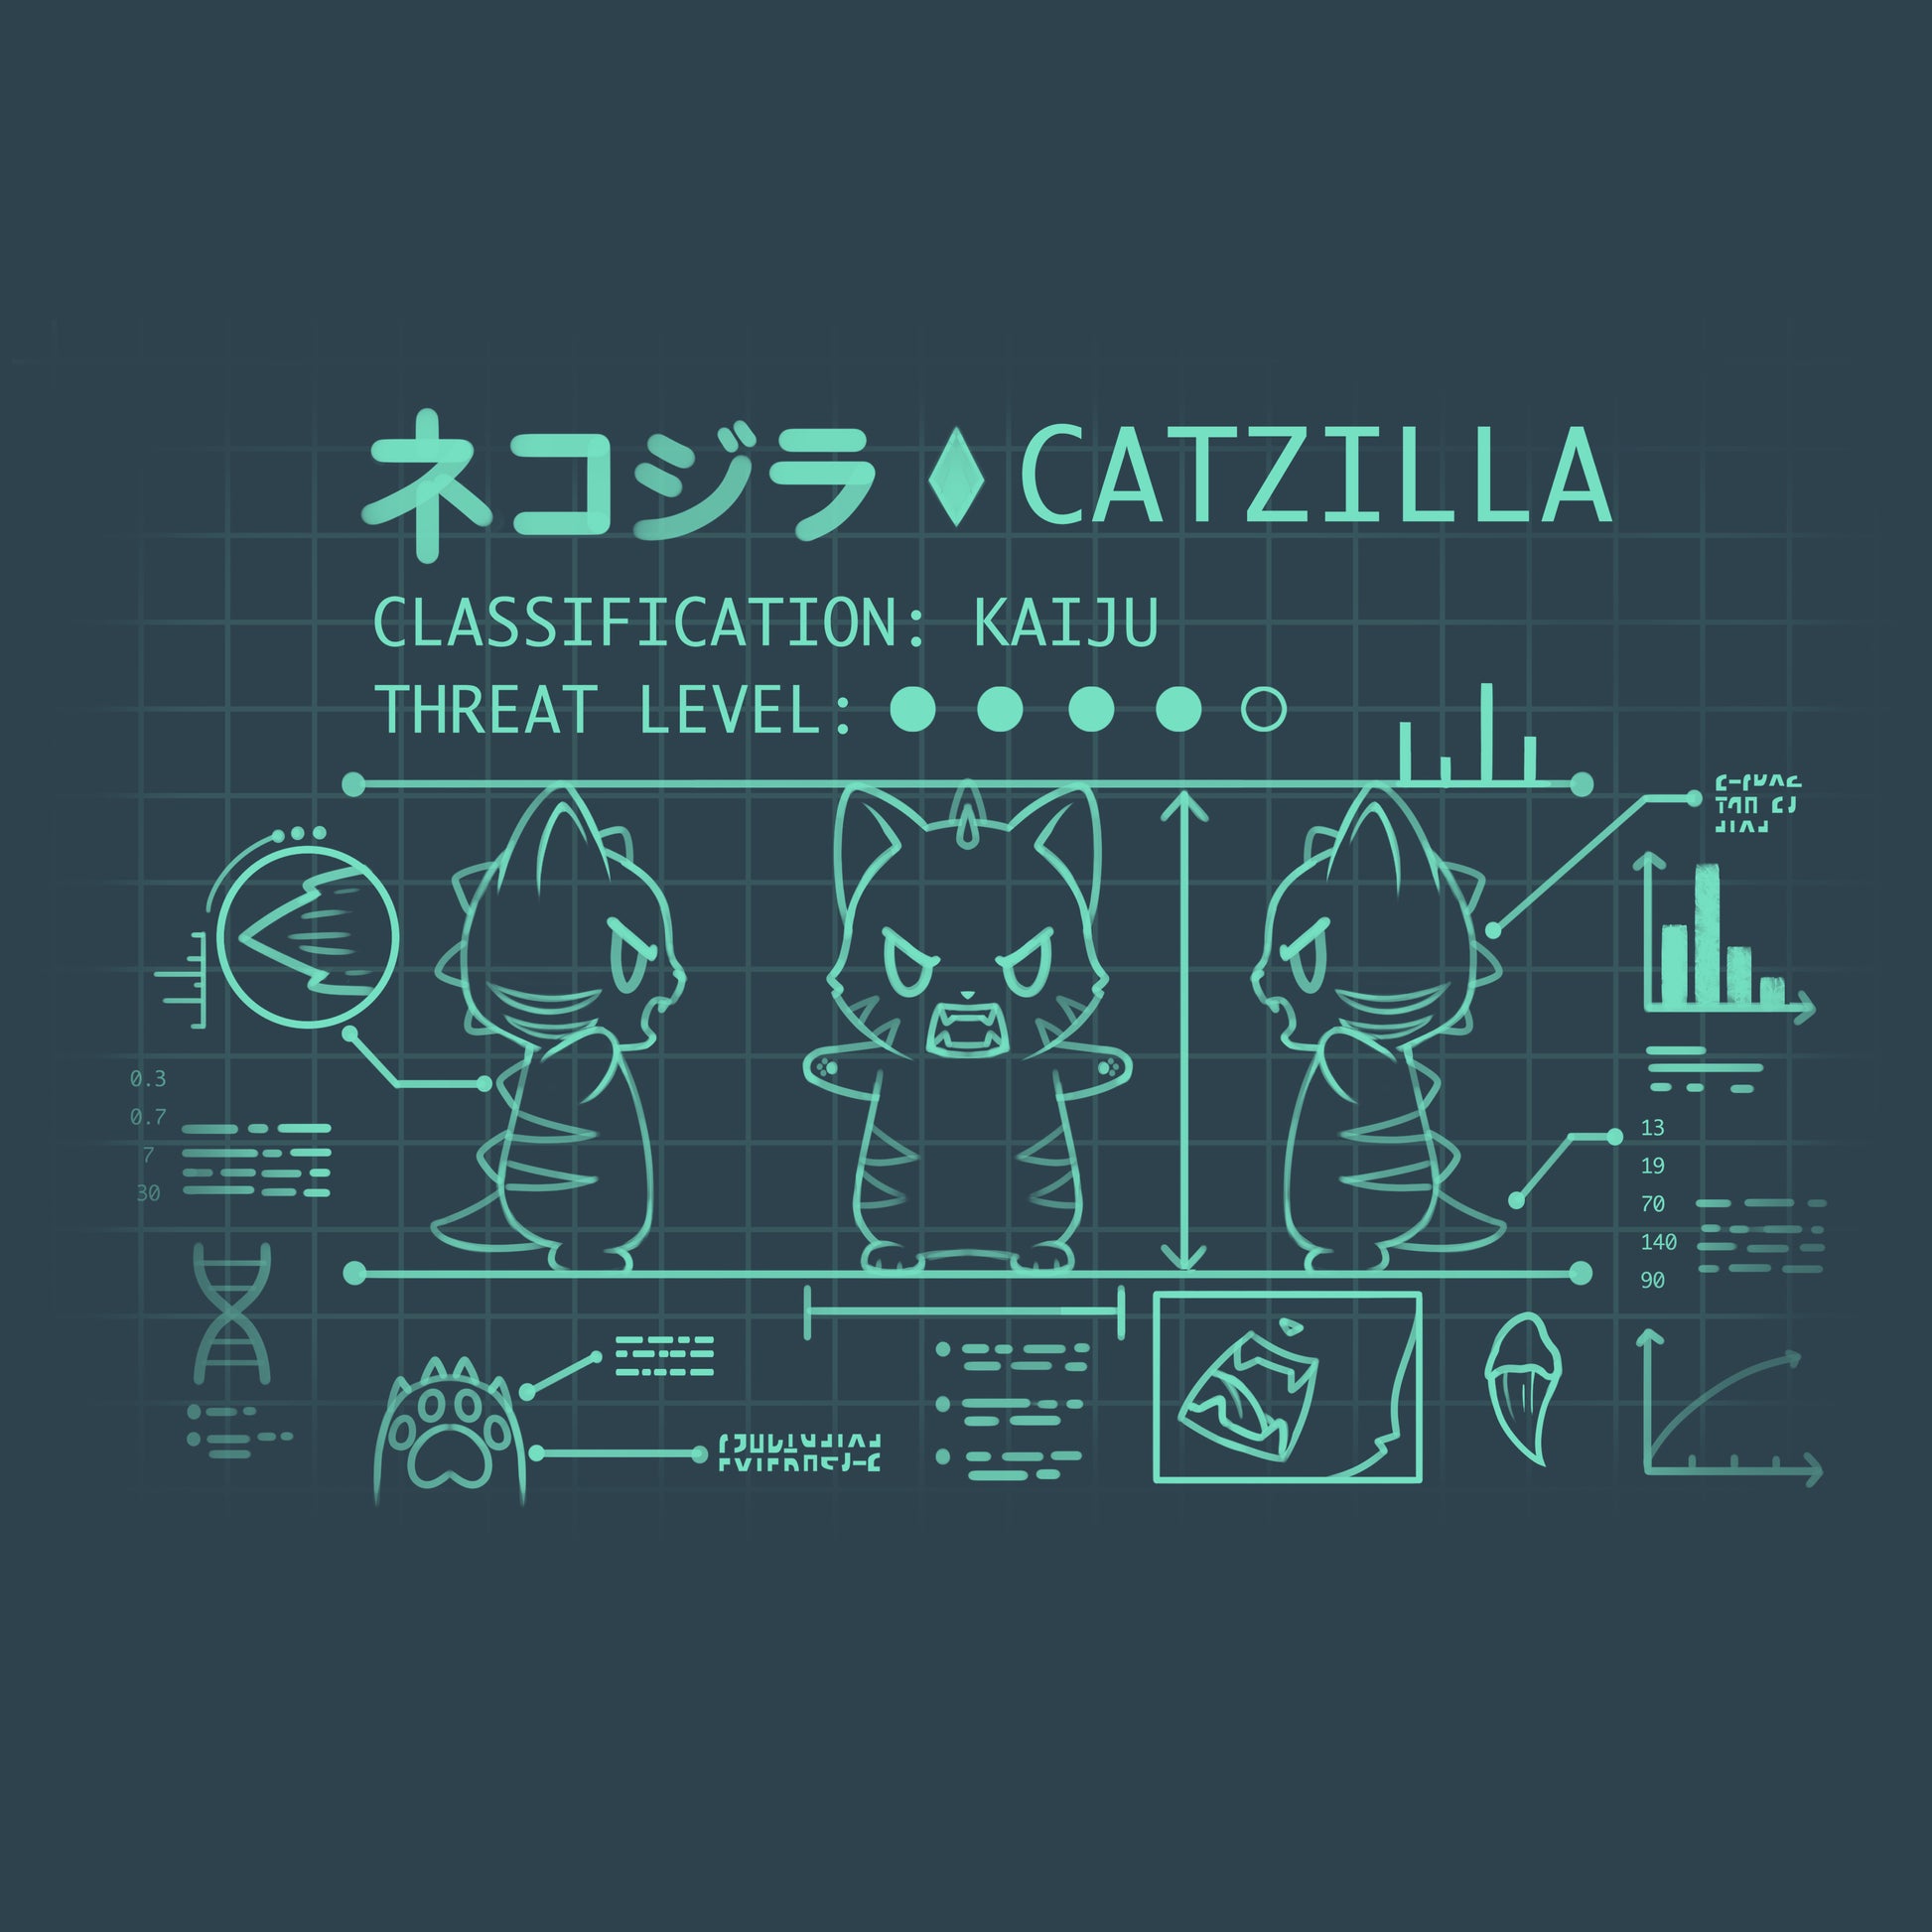 Blueprint-style illustration of "Kaiju Catzilla," a kaiju-style giant cat, with various threat level and feature annotations, highlighted by super soft ringspun cotton by TeeTurtle.